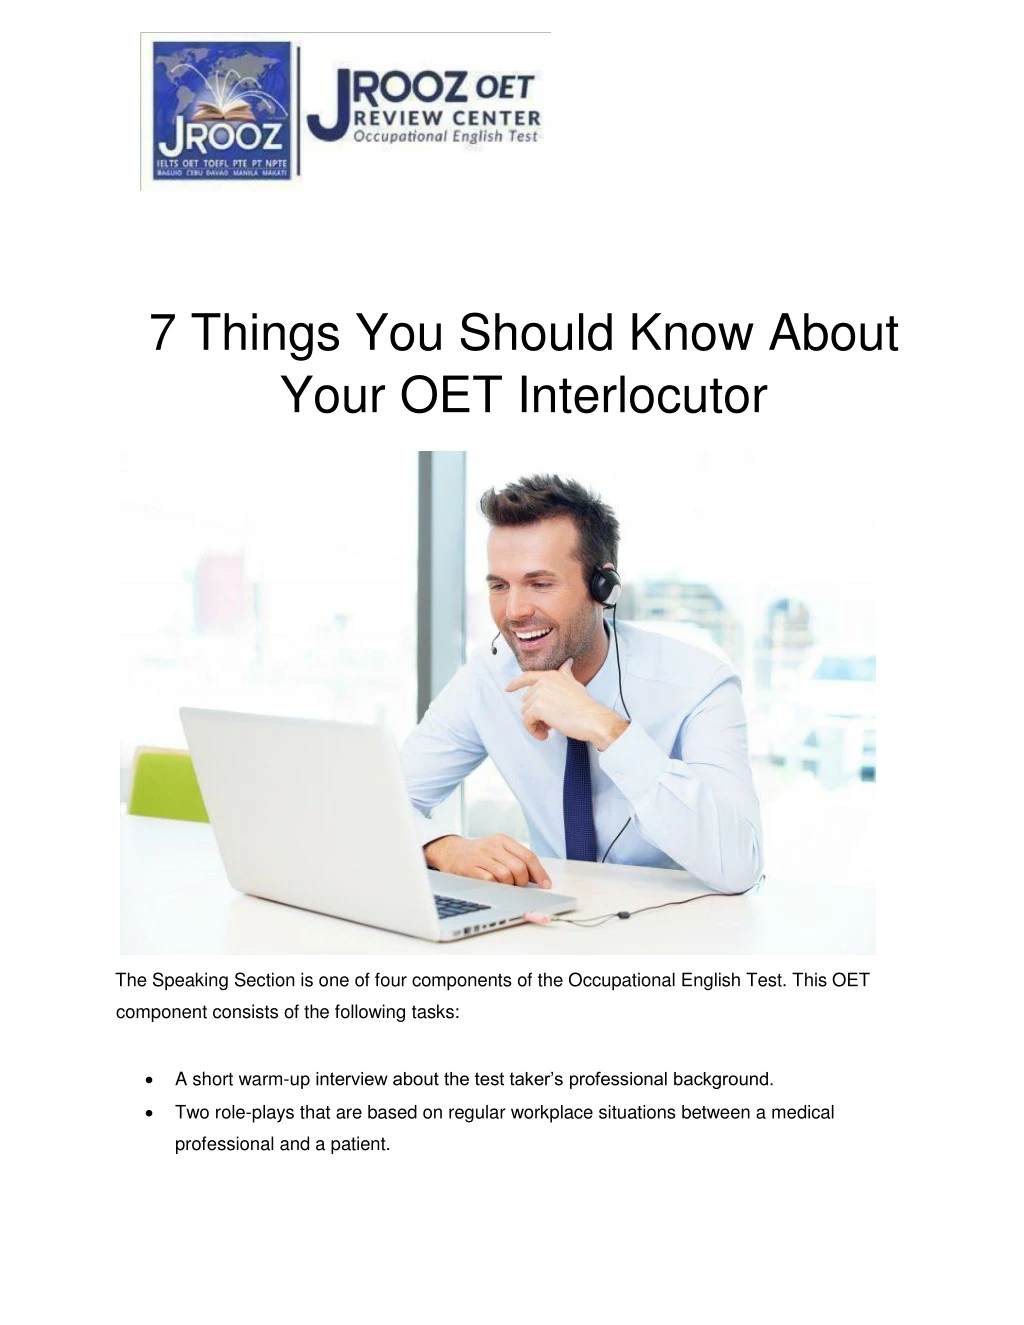 7 things you should know about your